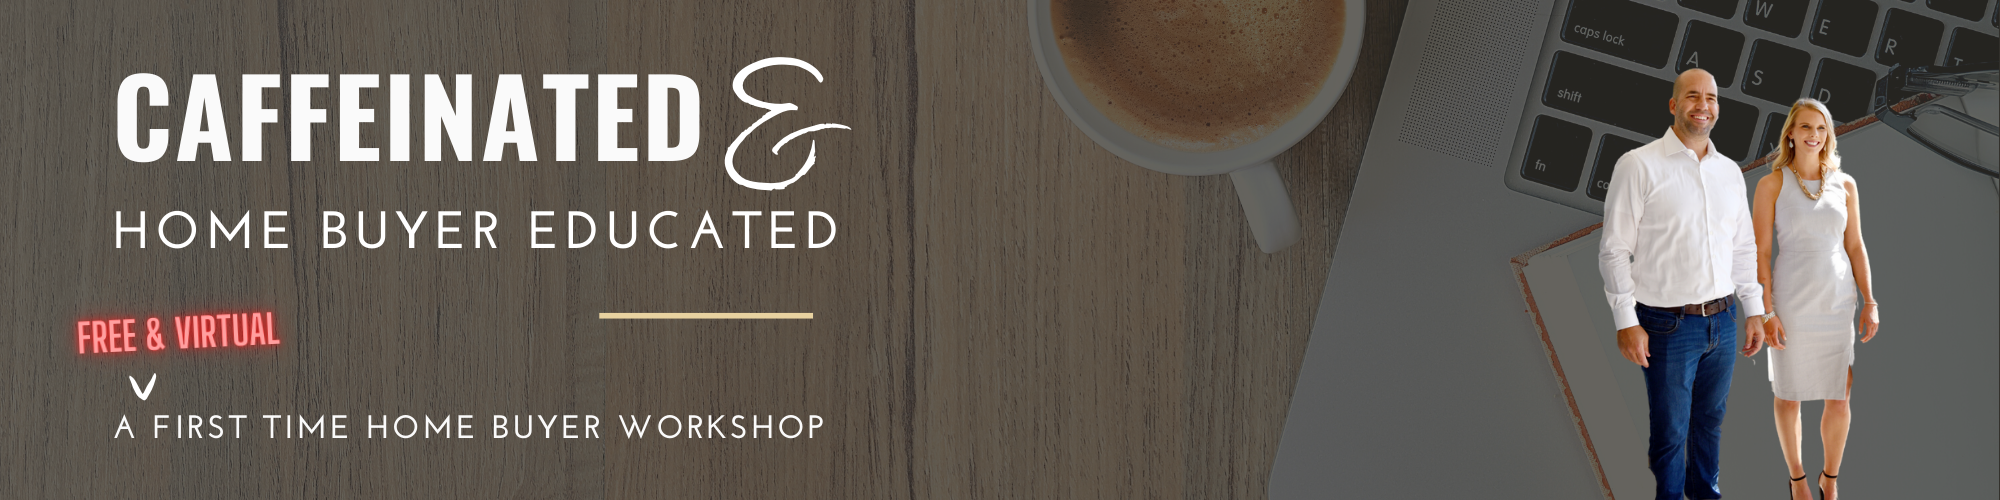 CAFFEINATED & HOME BUYER EDUCATED and First Time Buyer Workshops